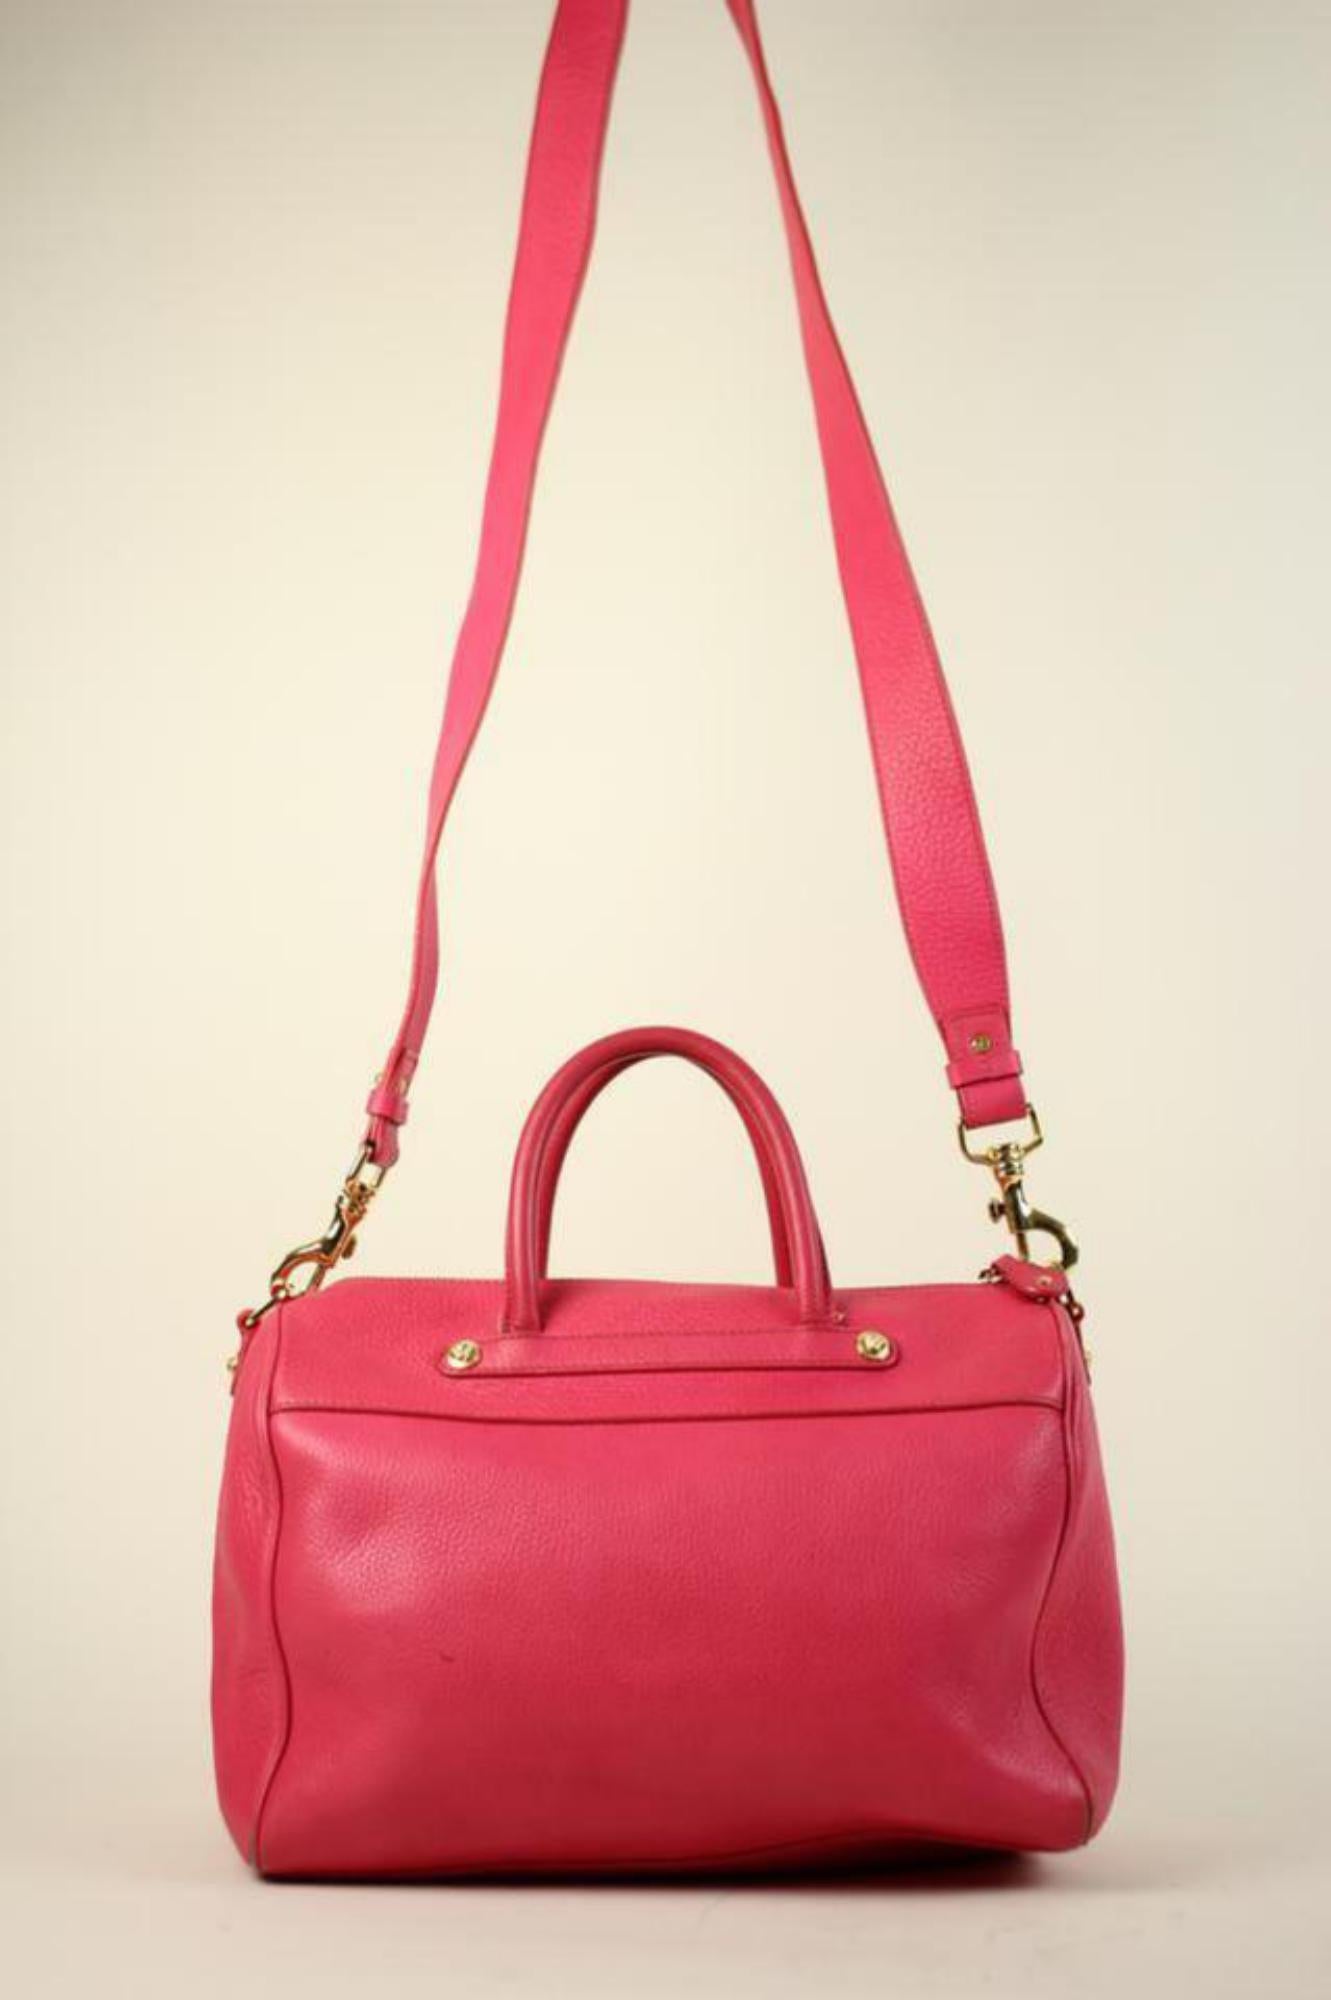 Women's Versace Hot Two Way Boston Vvav1 Pink Leather Shoulder Bag For Sale